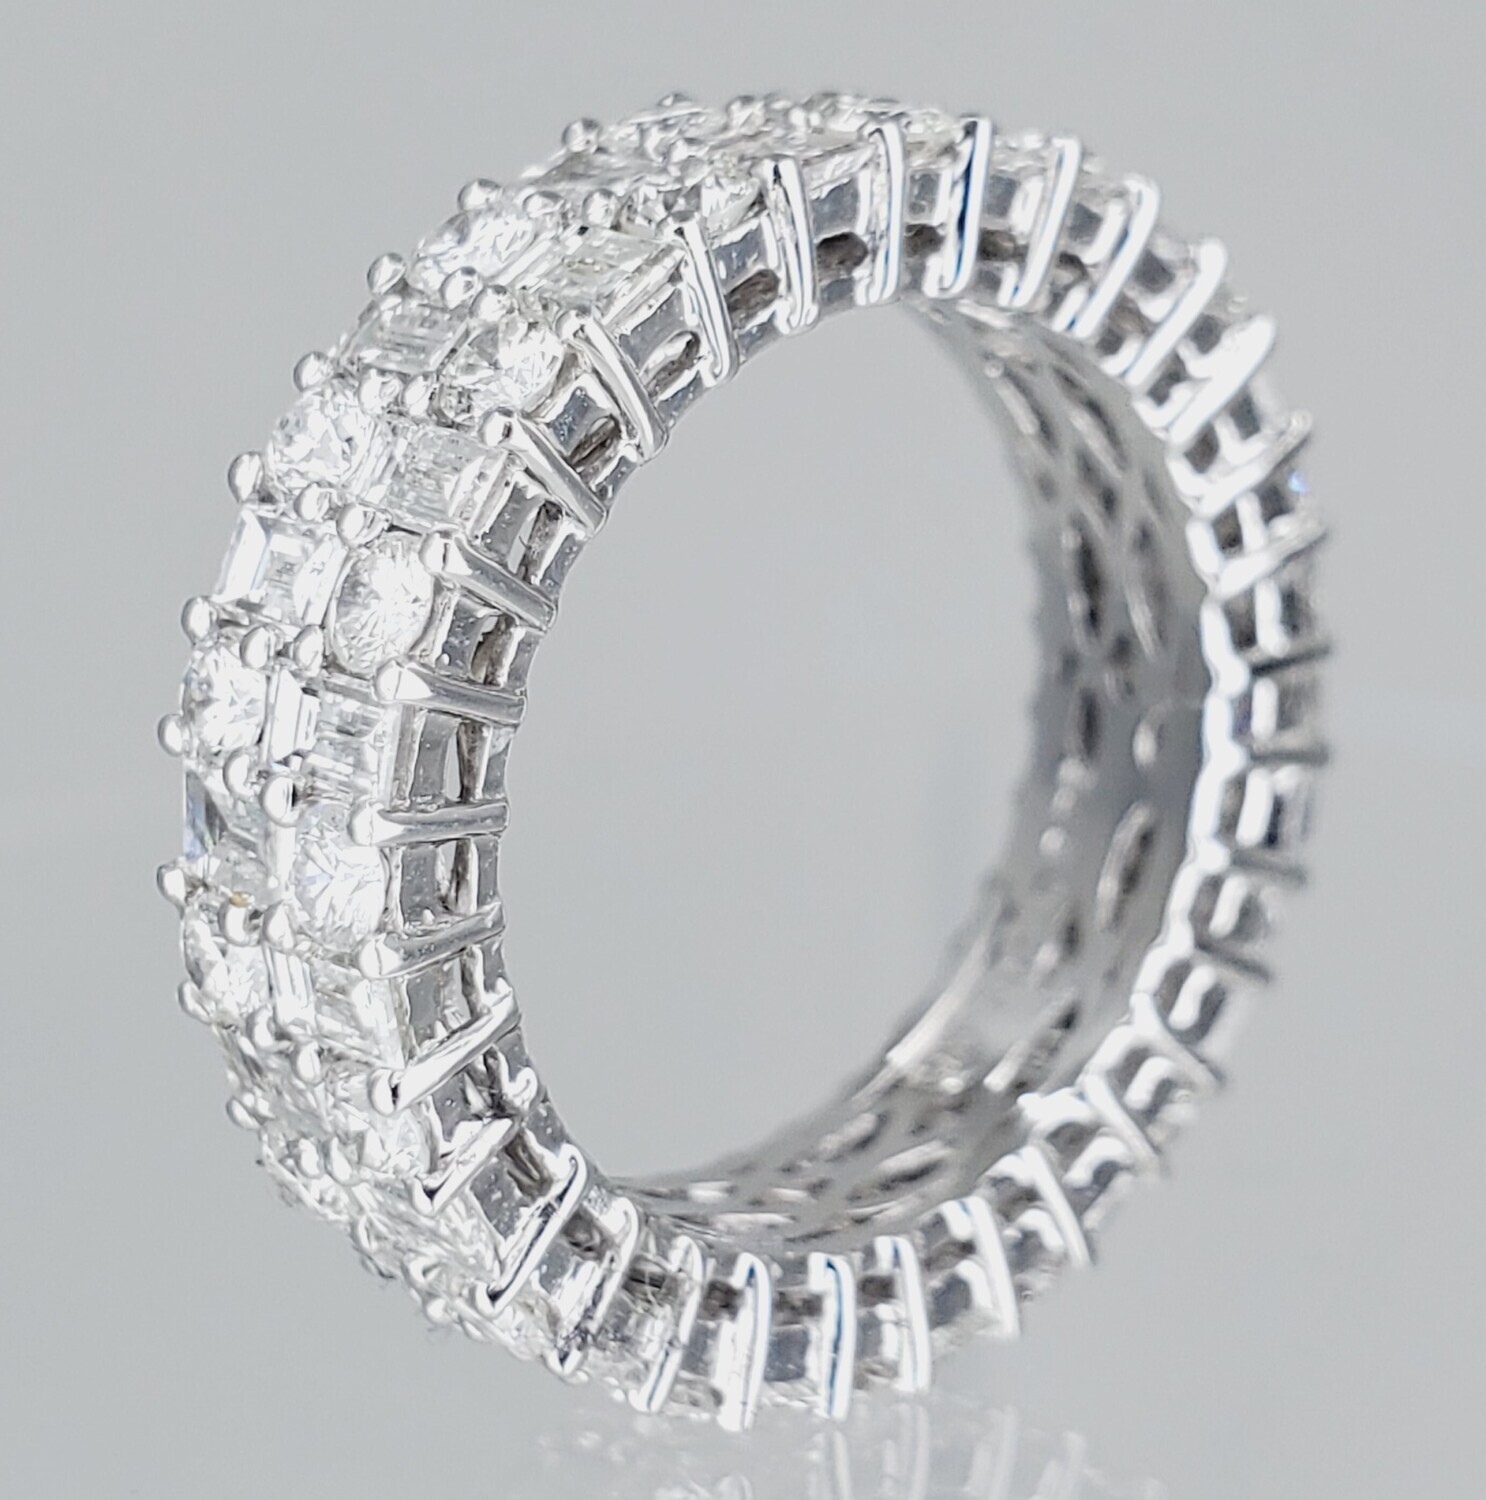 32 RD DIMAOND ETERNITY BAND SIZE 6.5(SOLD)